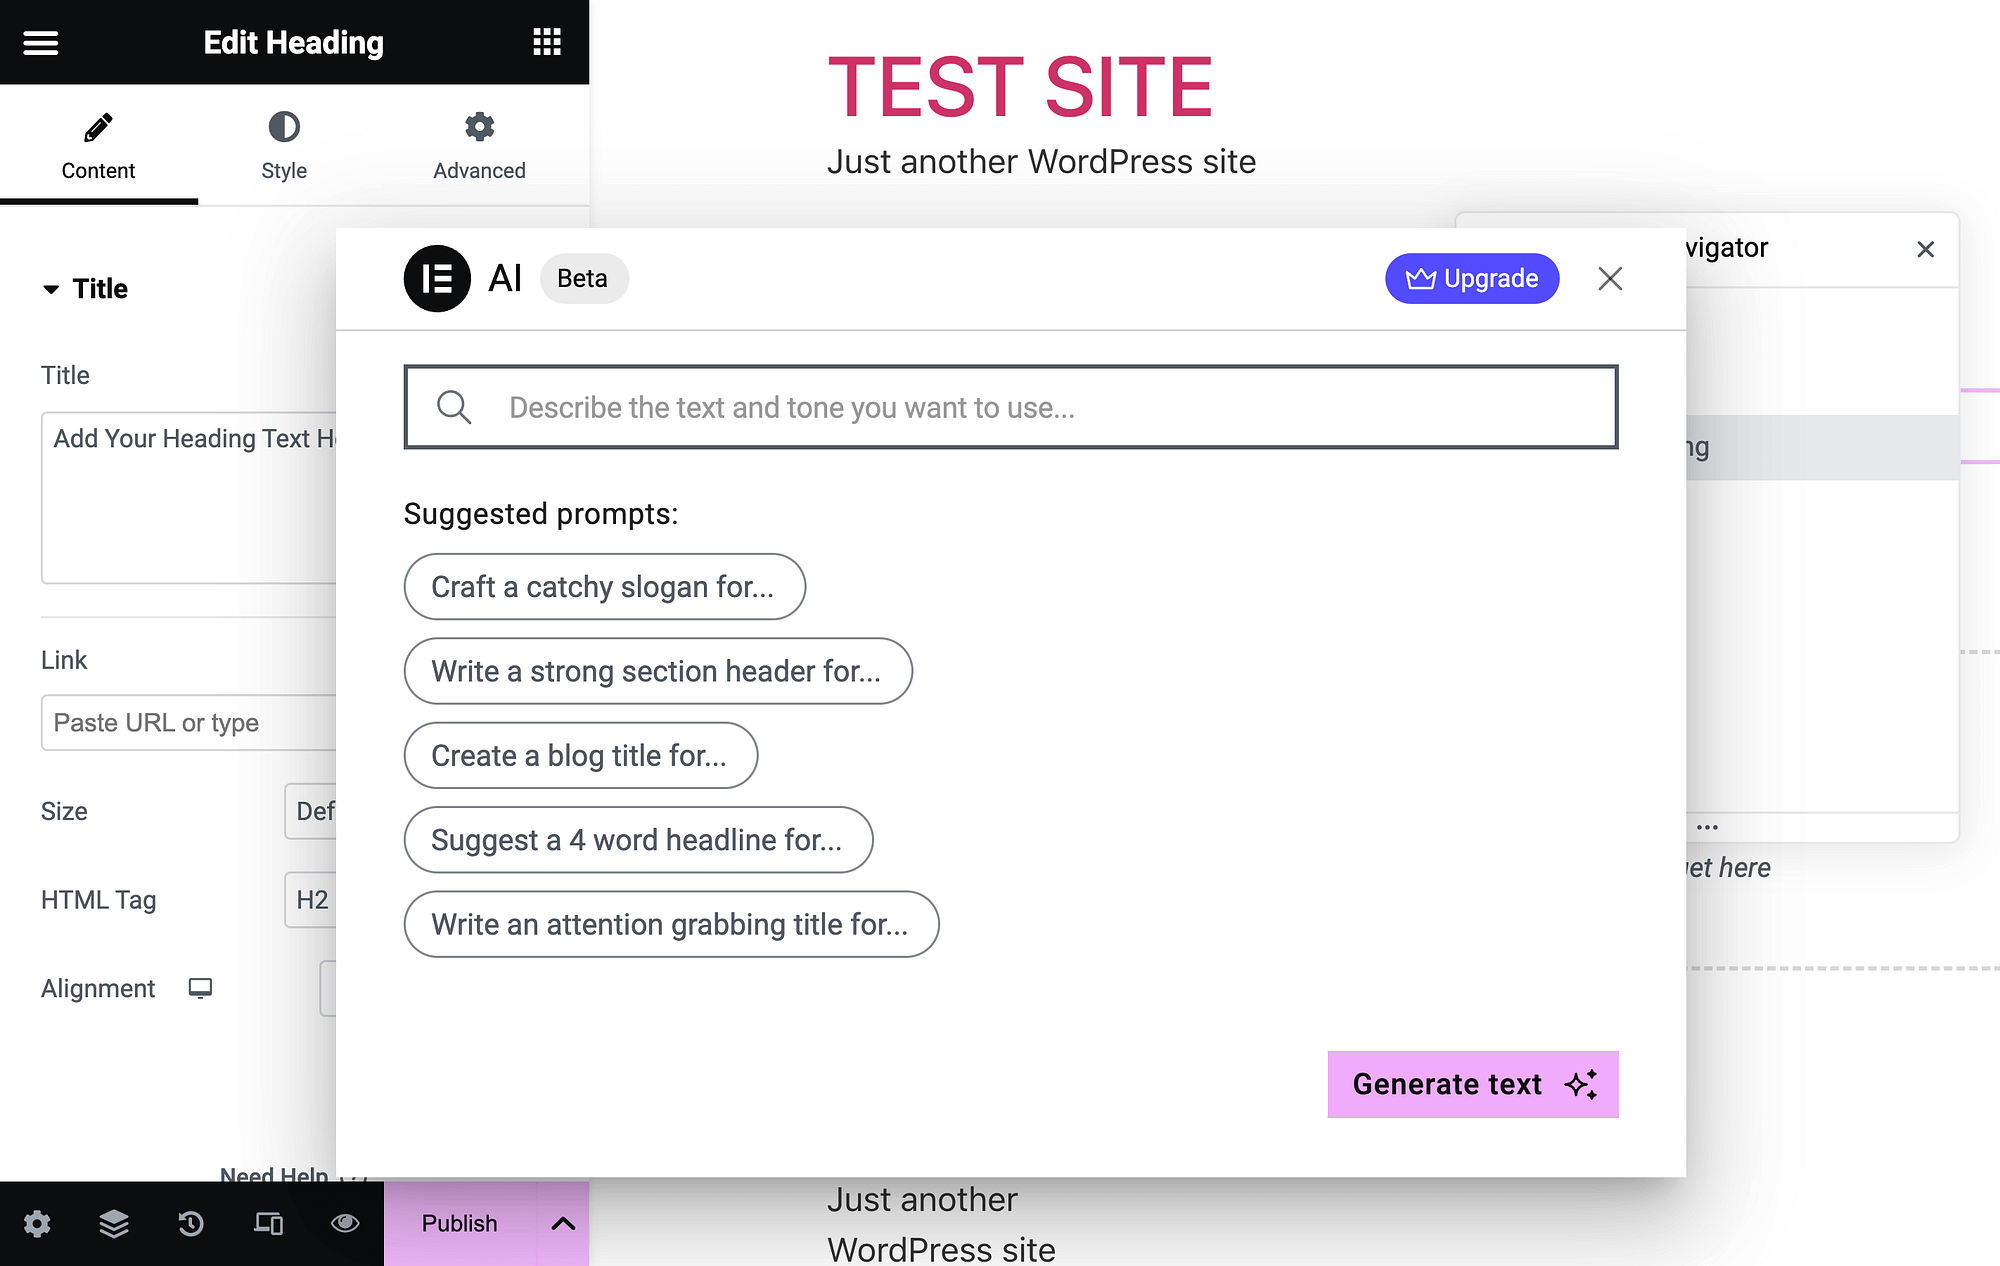 Start using Elementor AI to generate text.